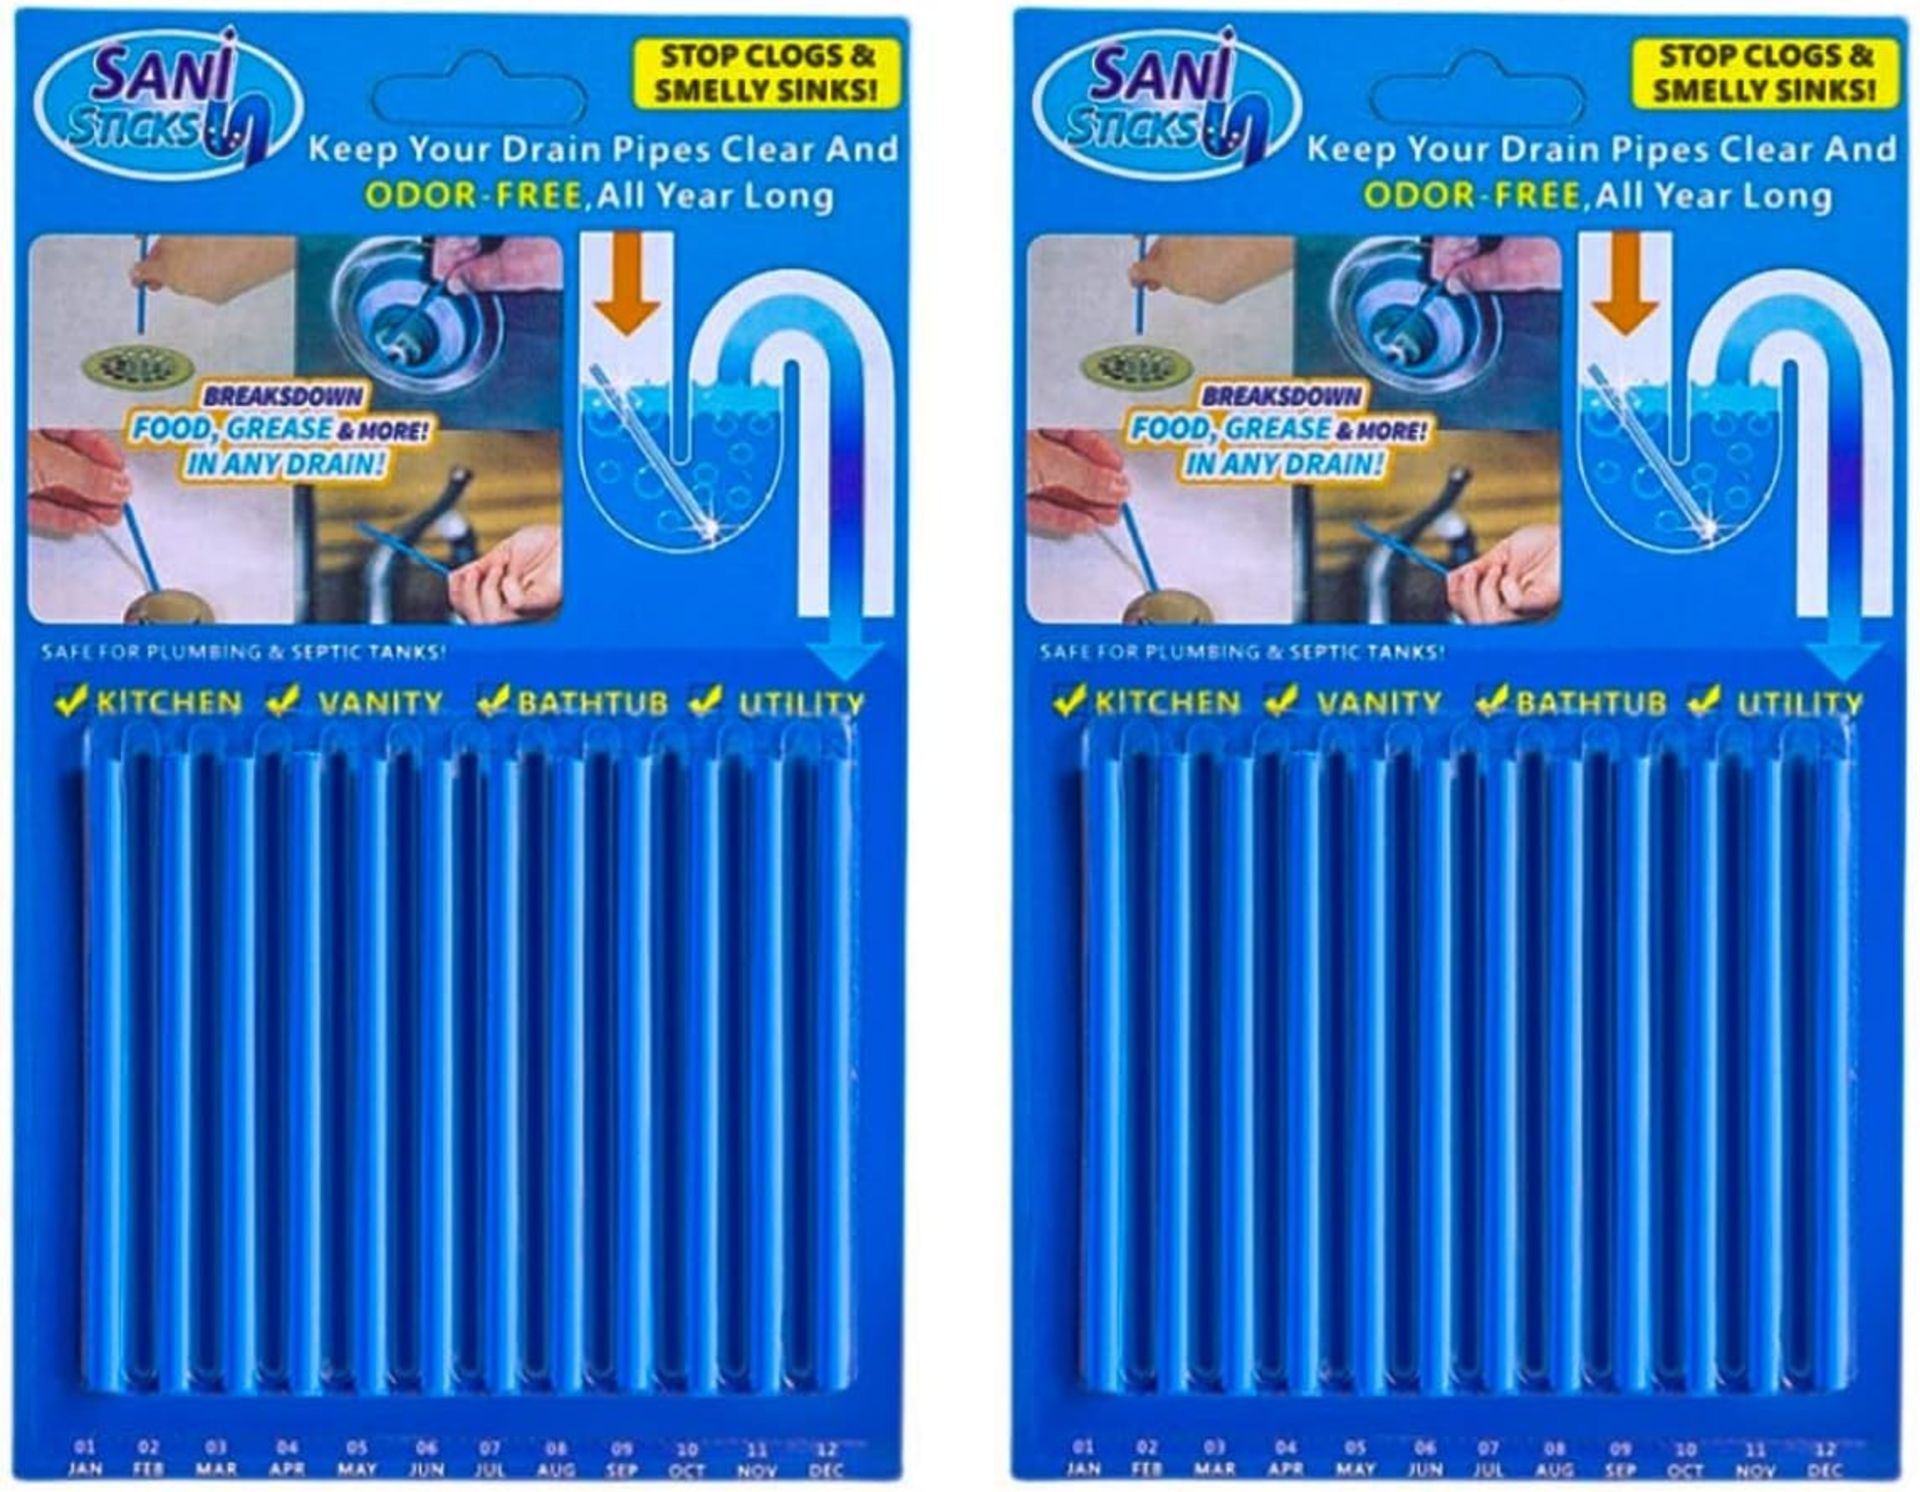 50x BRAND NEW Packs Of 12 Drain Cleaner Sticks - 2 PACKS. RRP £4.99 EACH. Rapid Decomposition: Drain